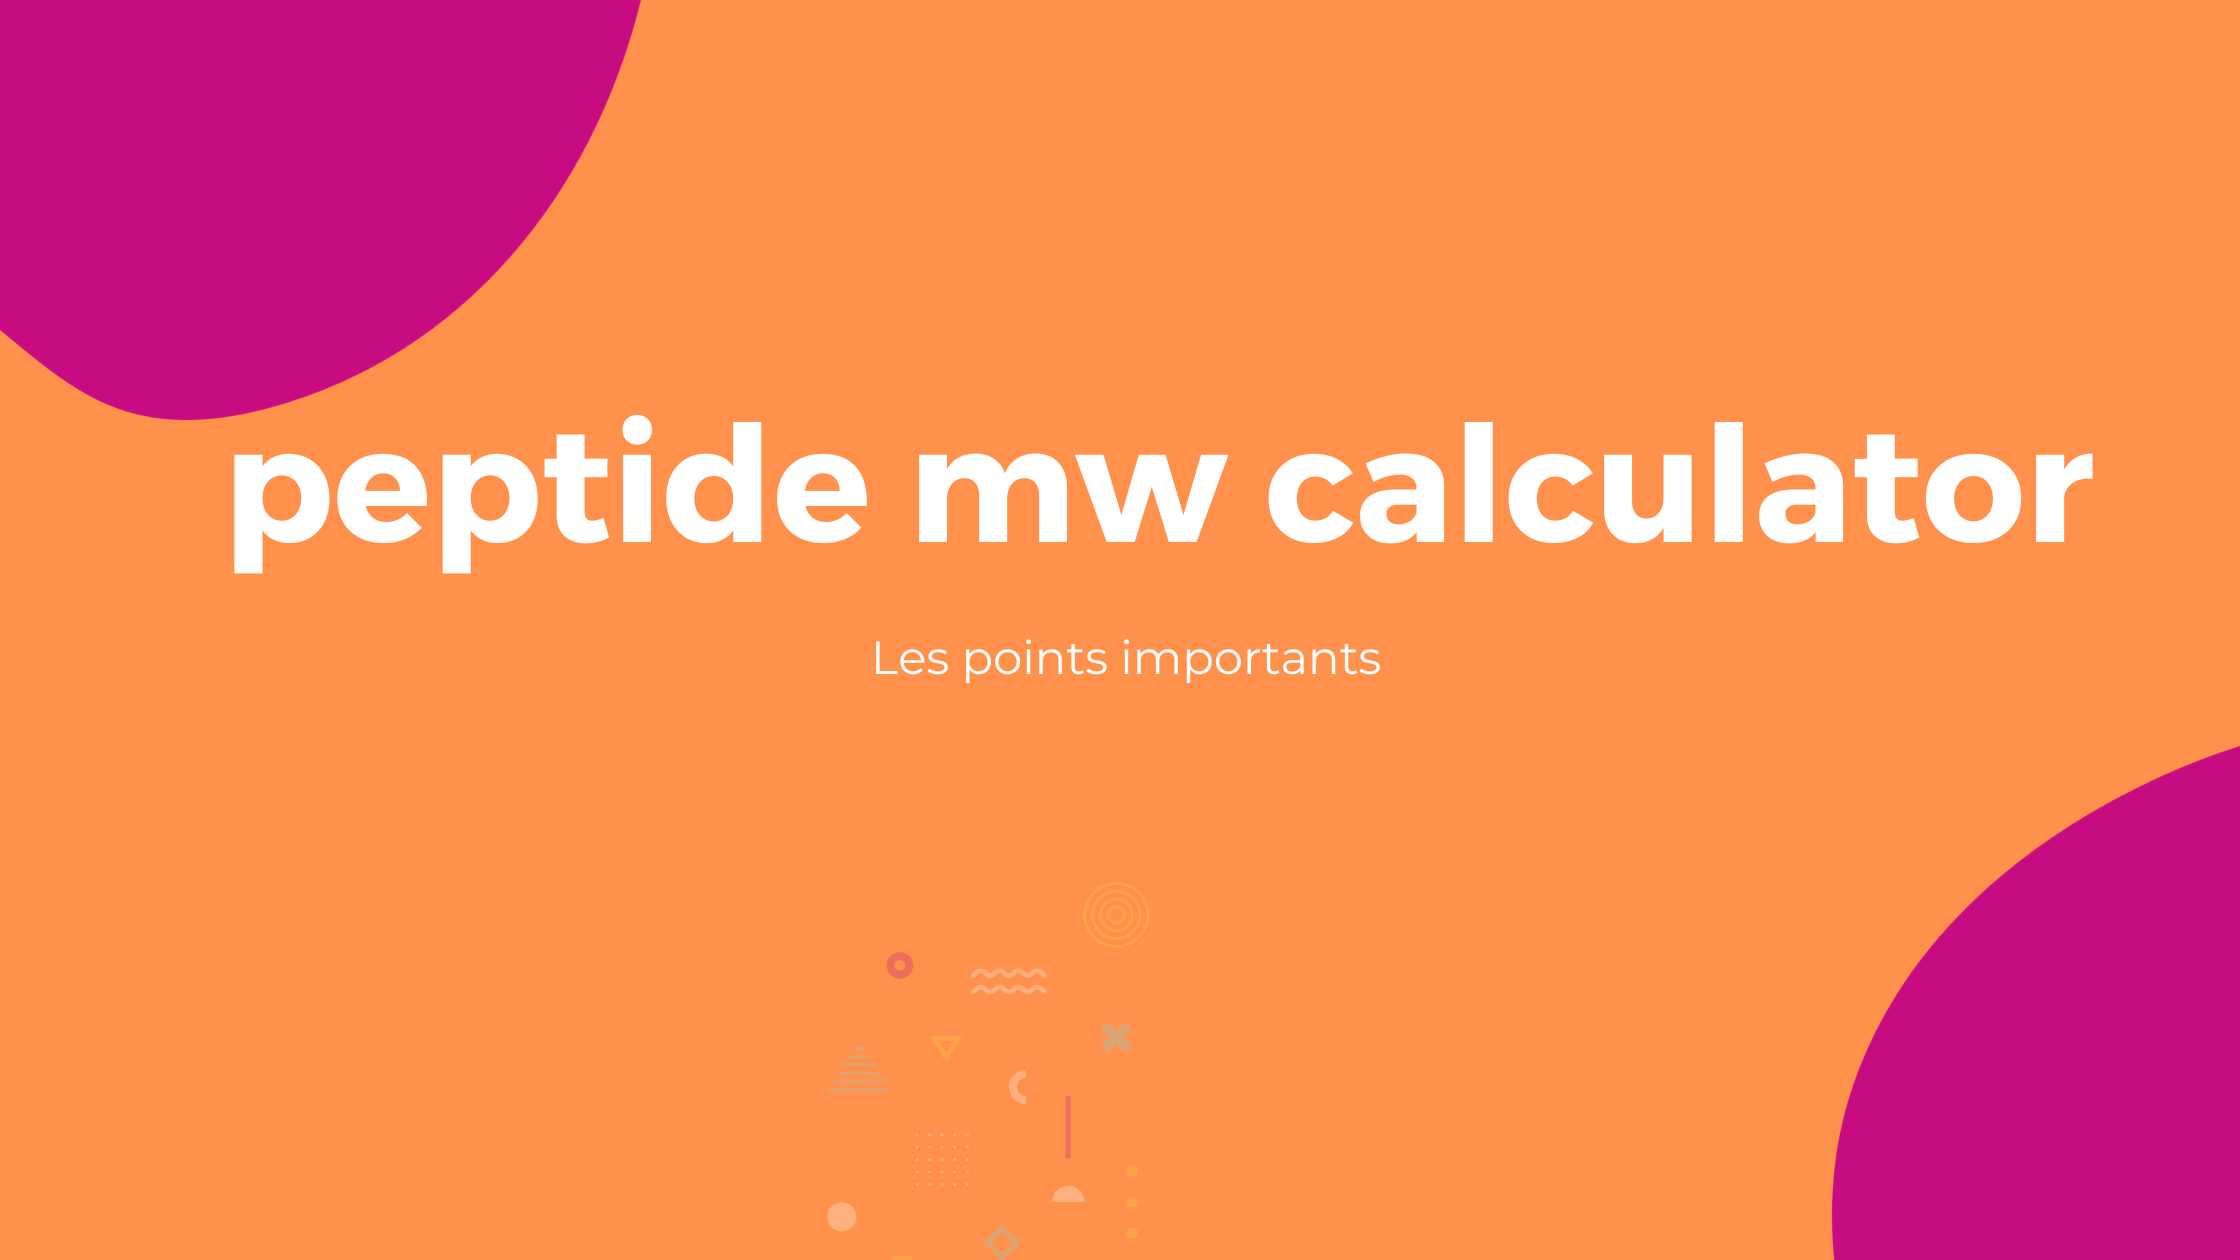 peptide mw calculator | Les points importants